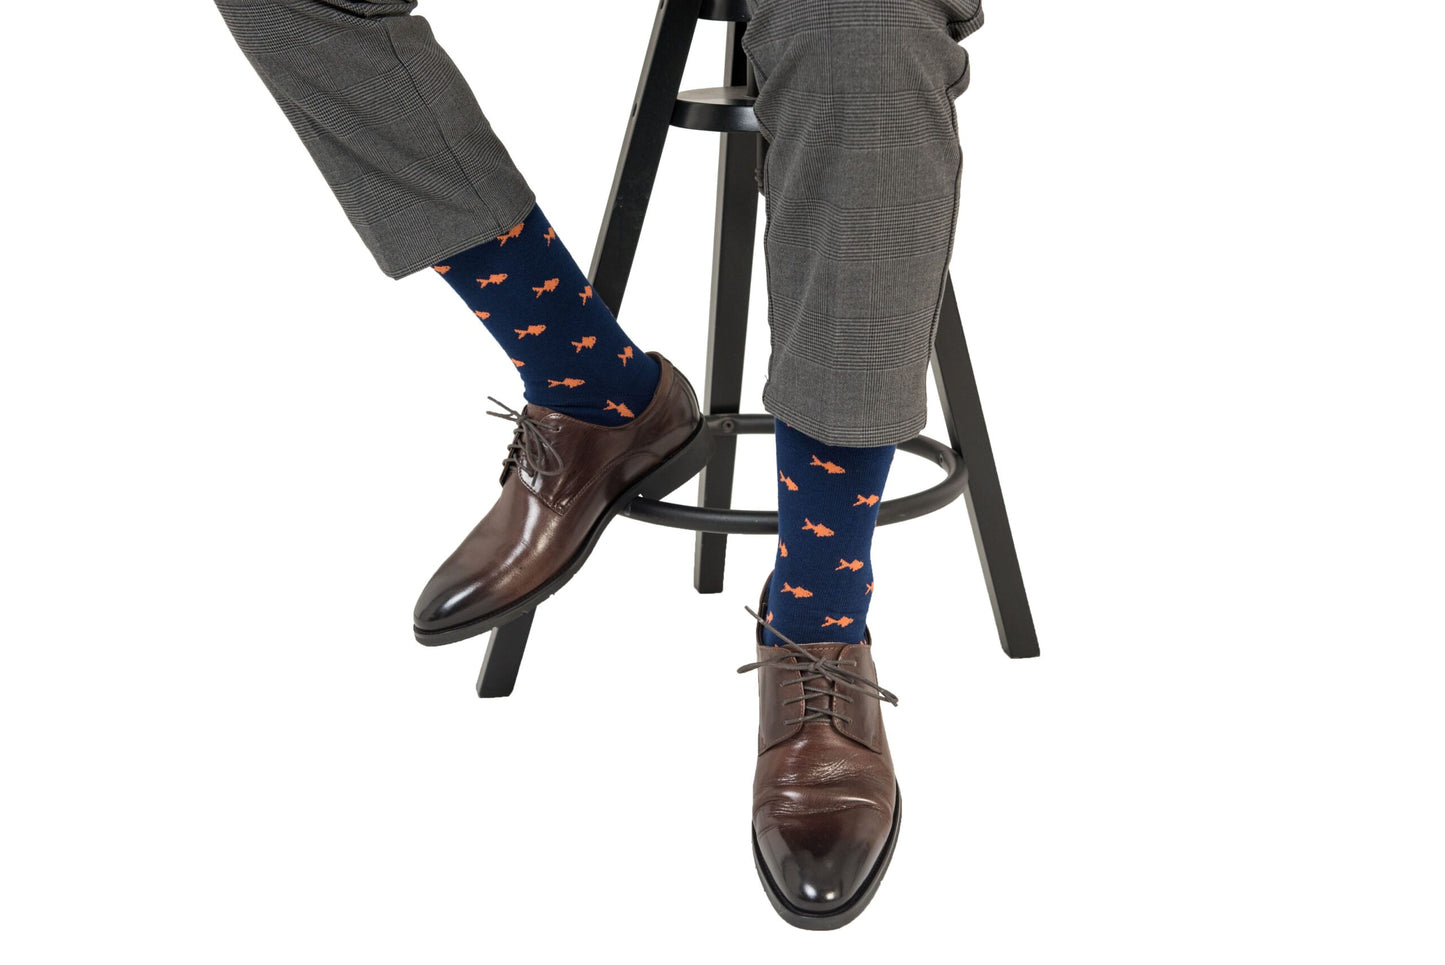 A man sitting on a stool wearing a pair of Gold Fish Socks.